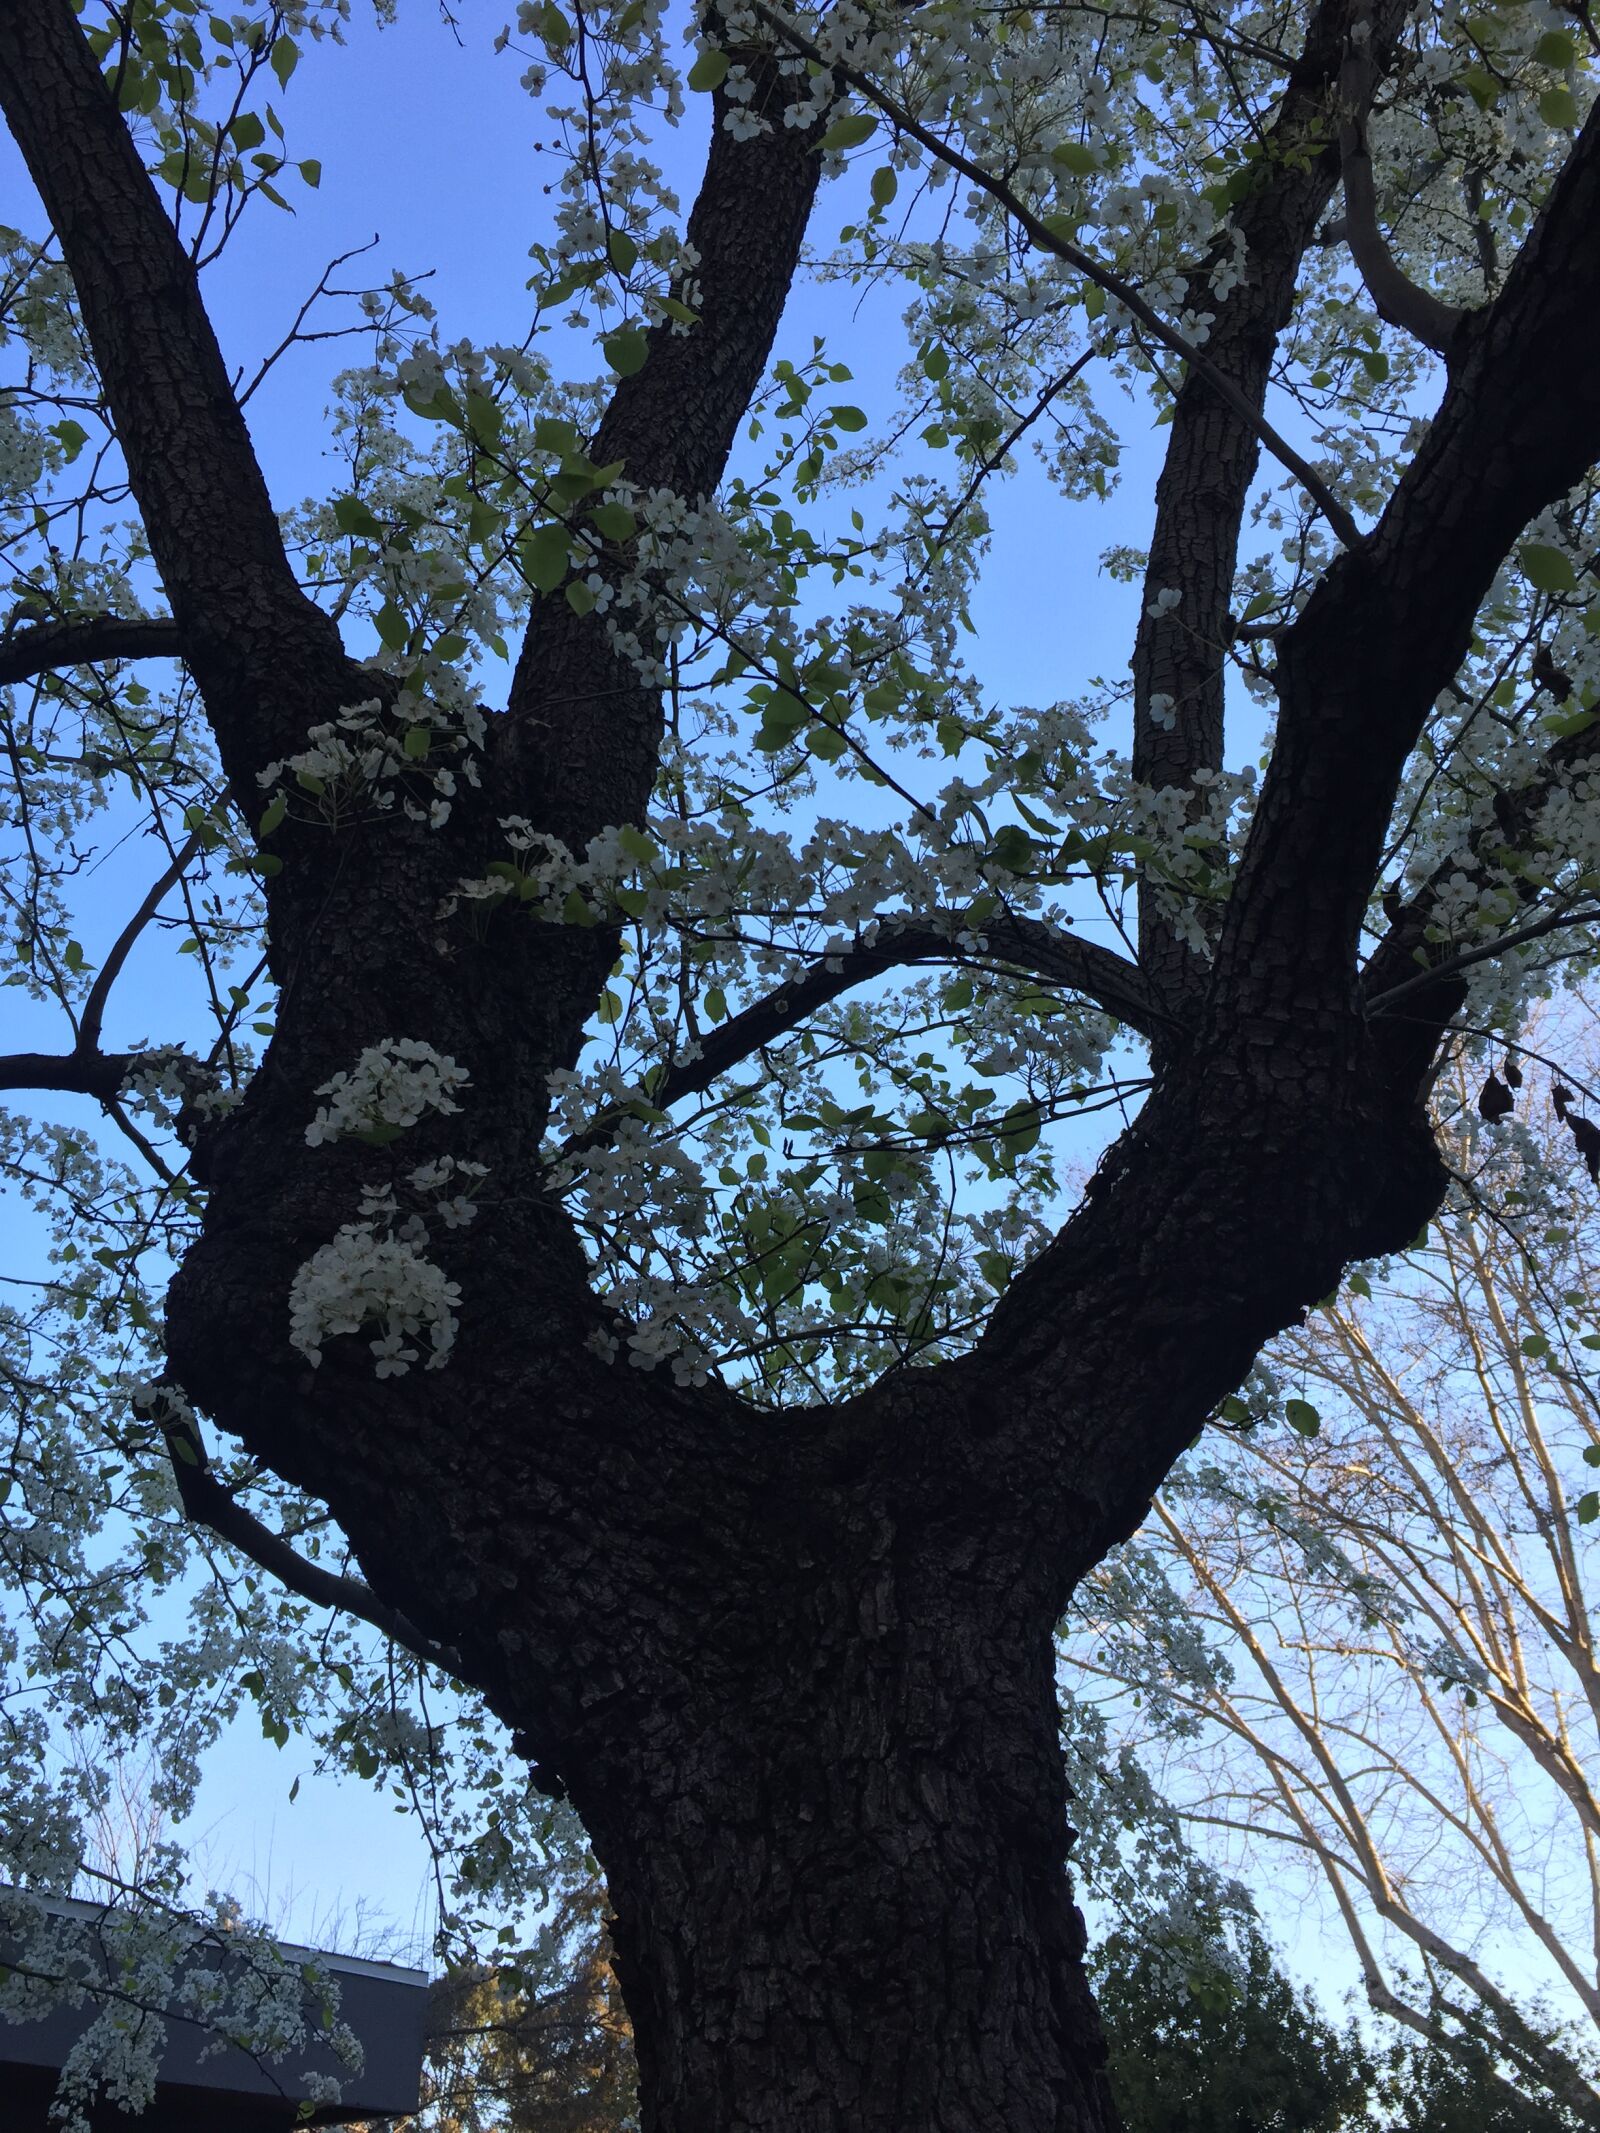 Apple iPhone 6 + iPhone 6 back camera 4.15mm f/2.2 sample photo. Tree, blossoms, branch photography